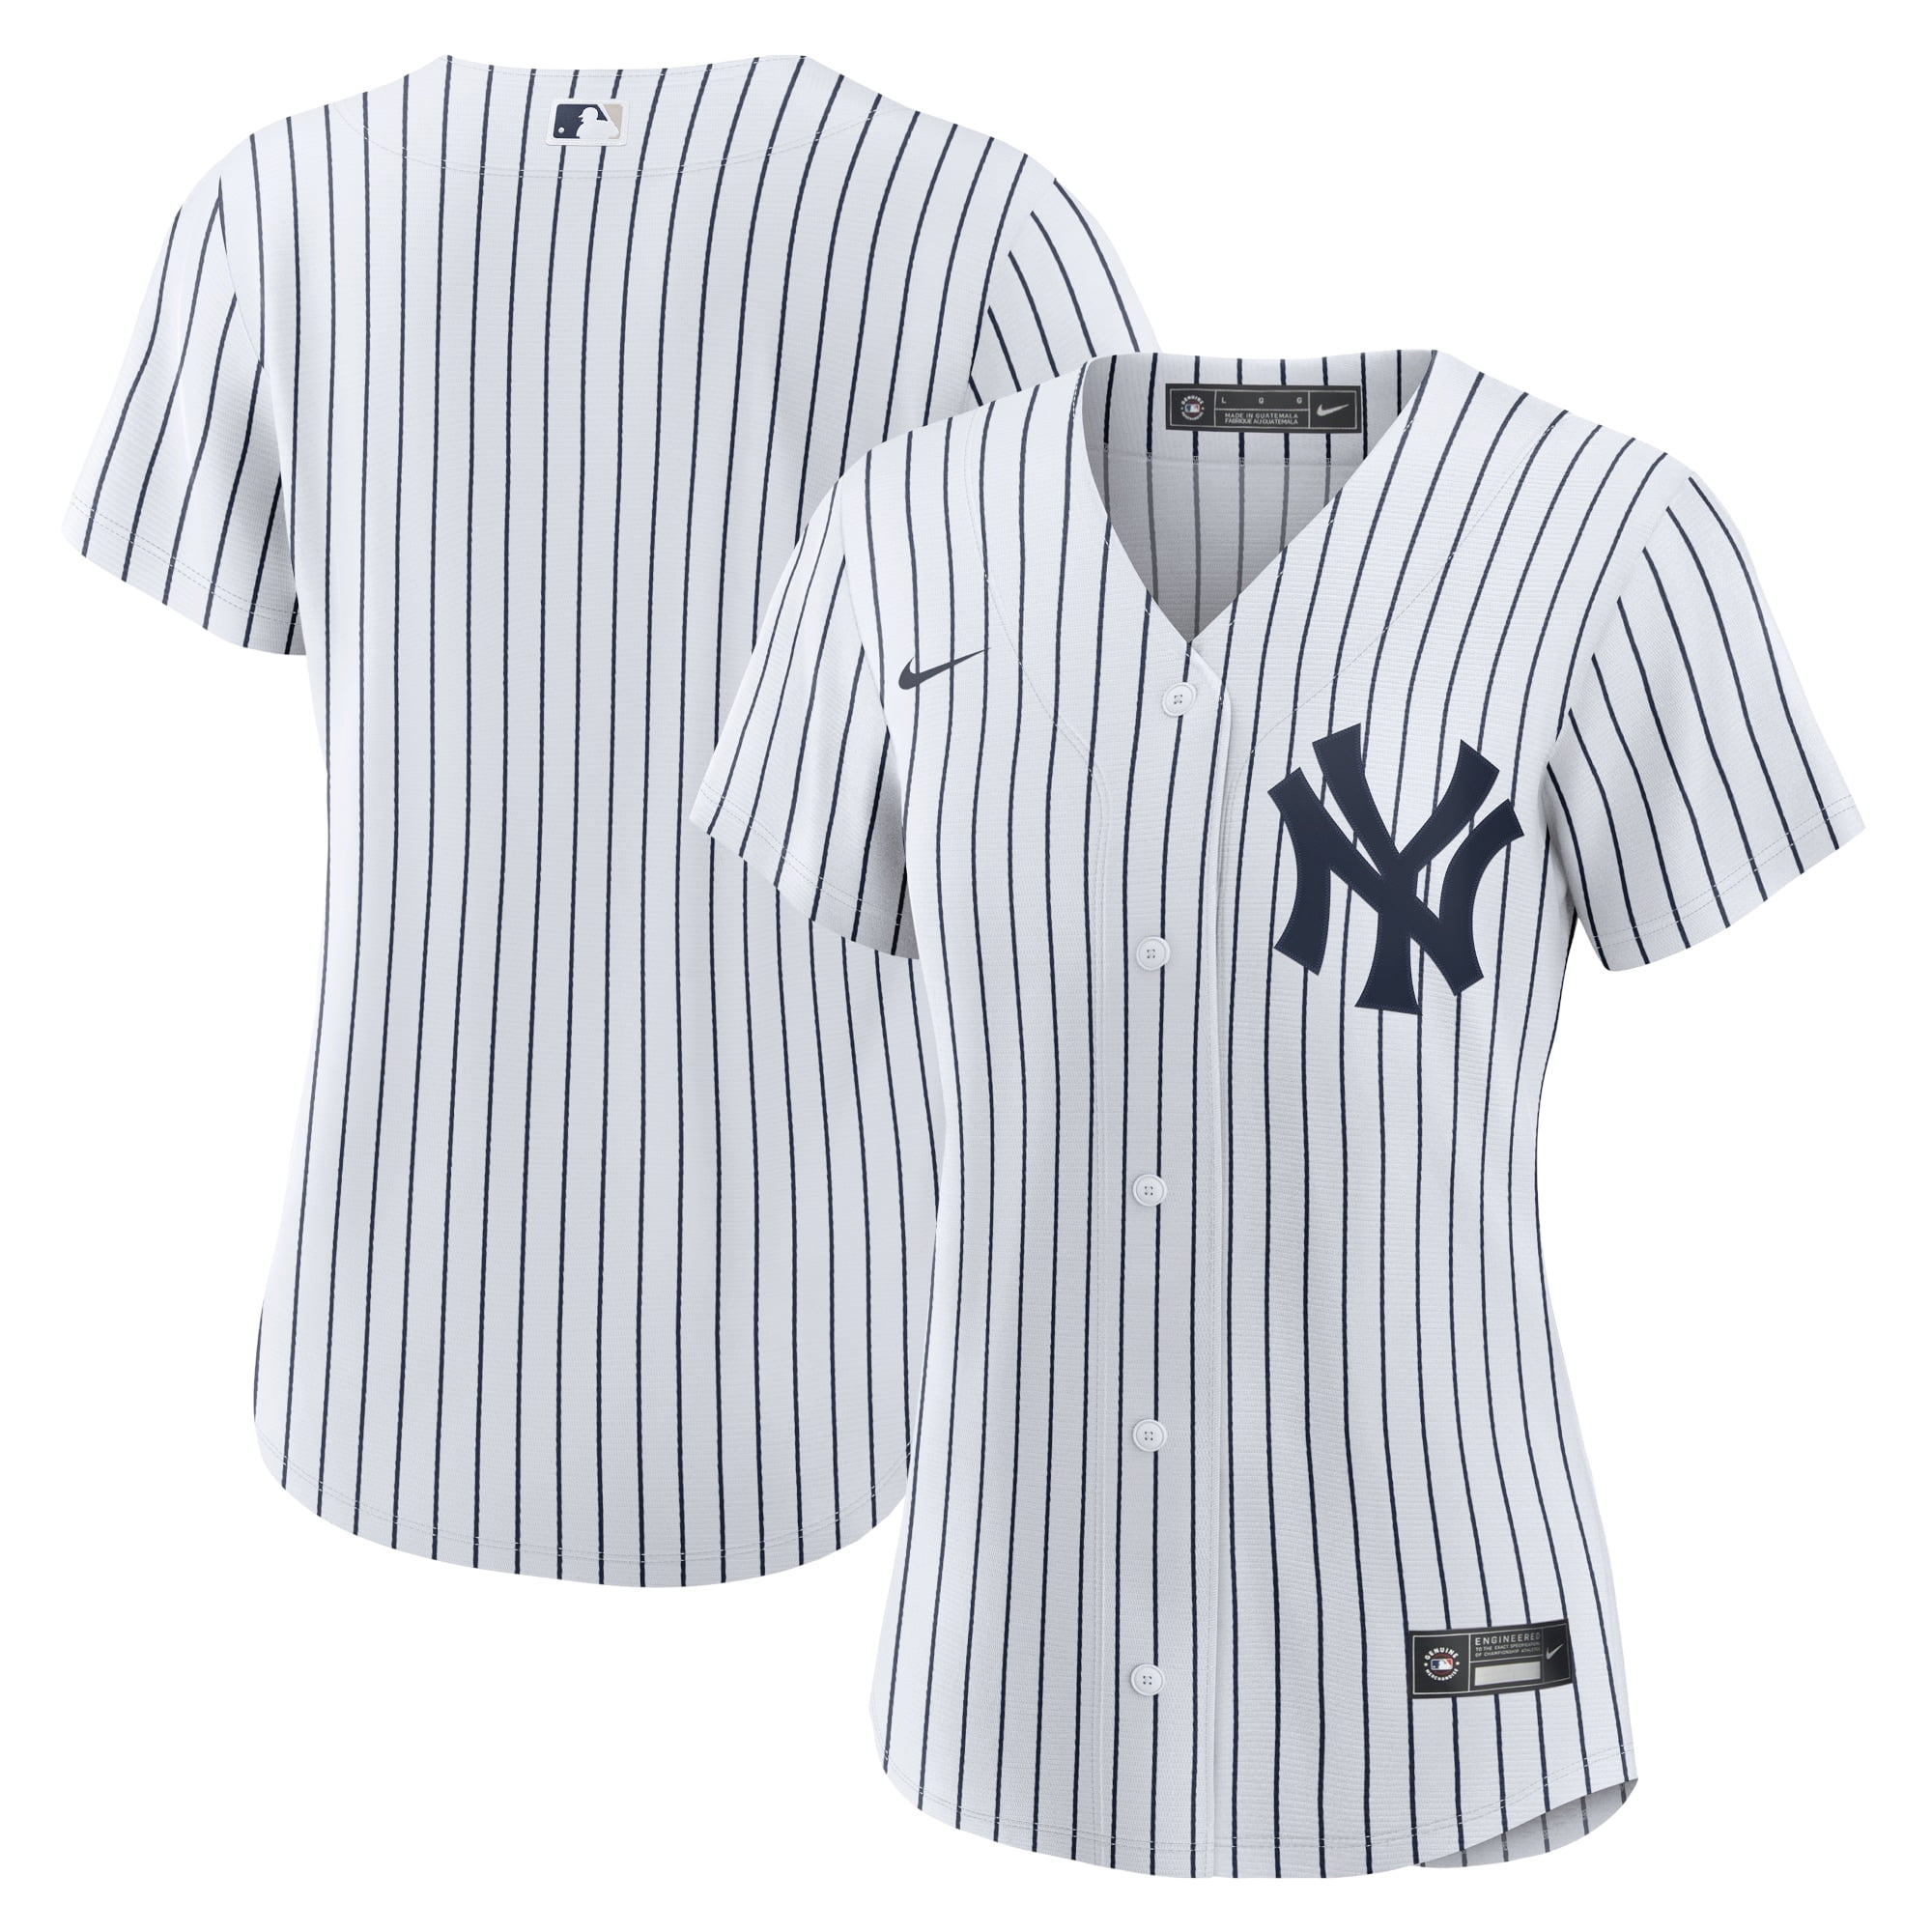 Gerrit Cole New York Yankees Autographed White Nike Replica Jersey